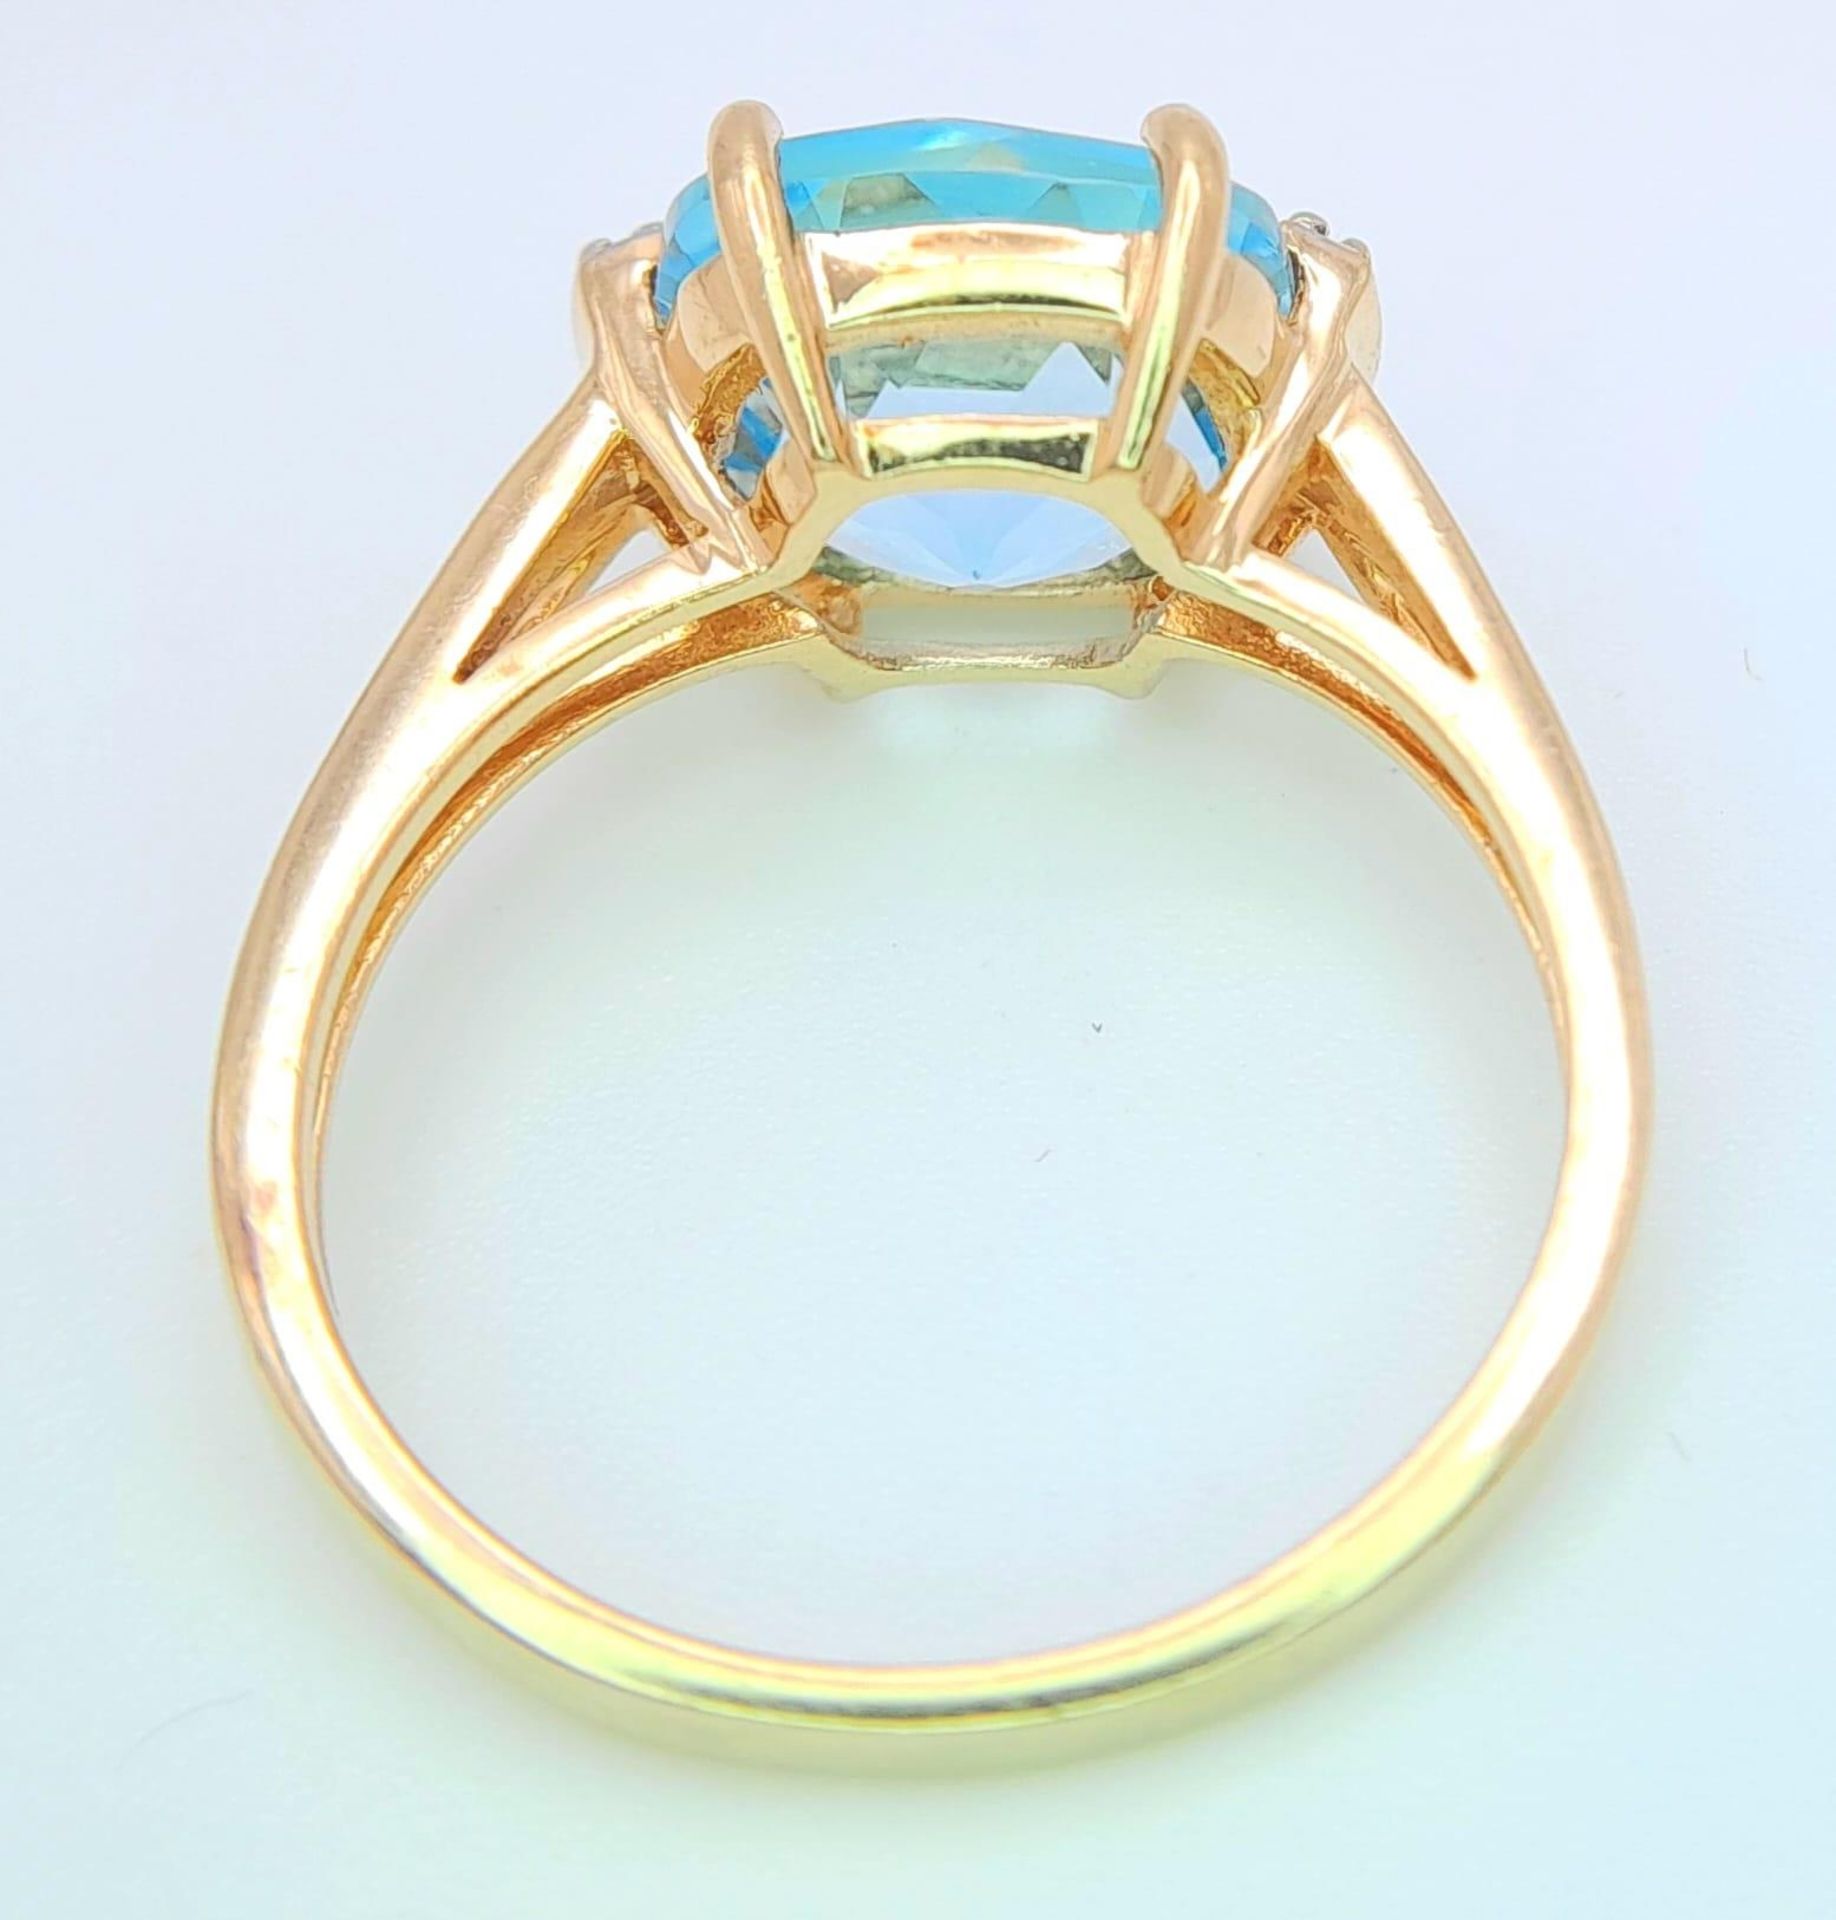 A very attractive 14 K yellow gold ring with a large, cushion cut aquamarine and a pair of - Image 10 of 14